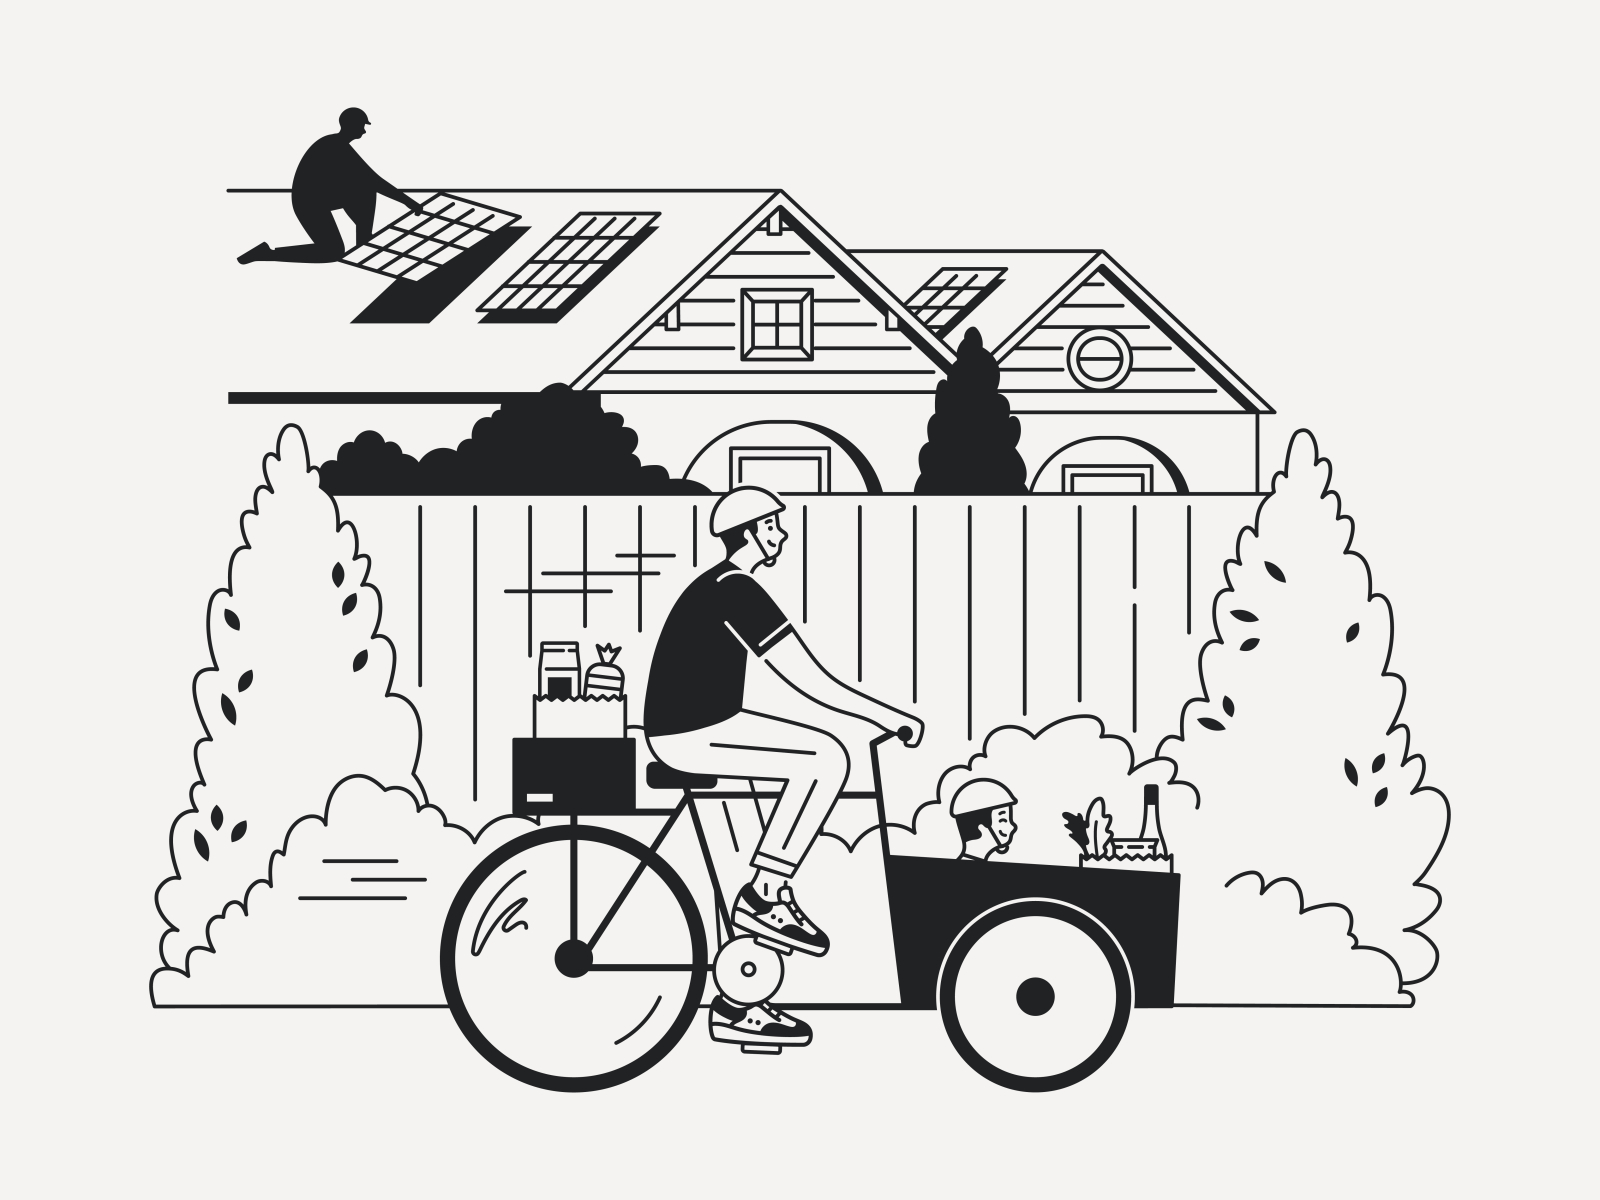 Quick ride to the grocery store. bicycle bike bungalow bushes carbon footprint character design city cityscape climate change eco-friendly ecofriendly environmental family fatherhood landscape neighborhood parenthood solar energy solar panels